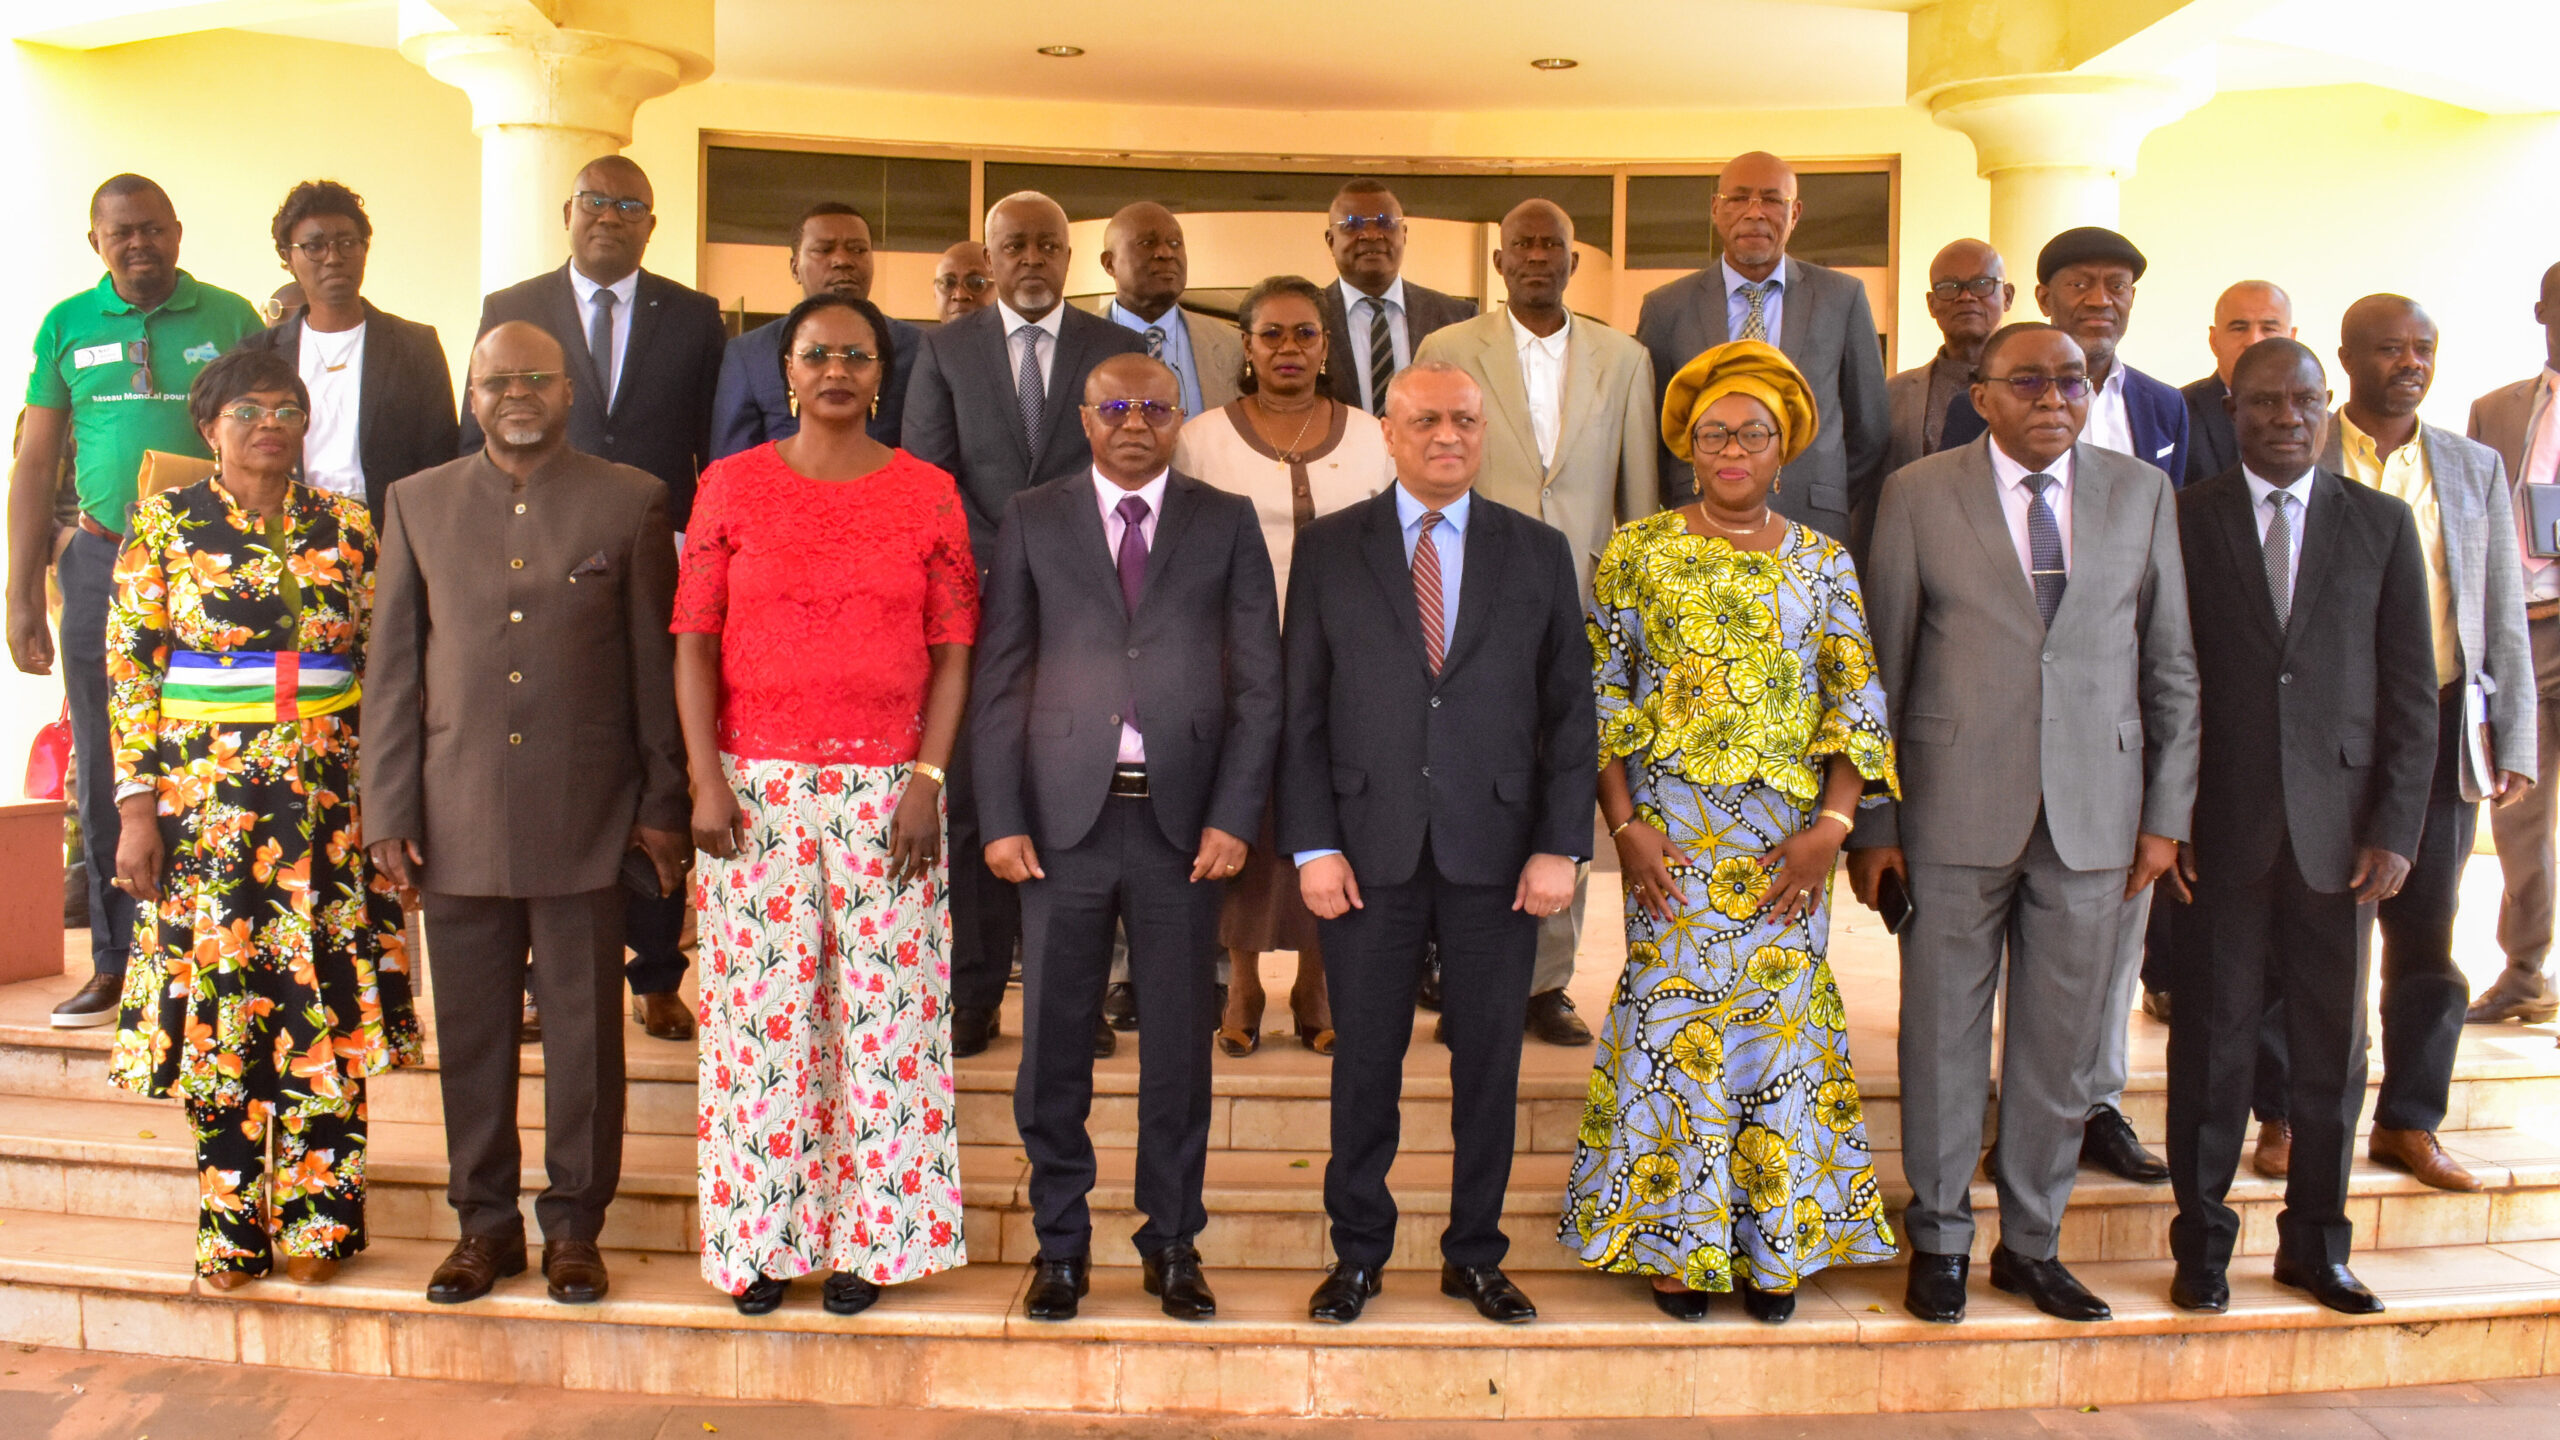 Group photo from high-level dialogue on climate change adaptation and peacebuilding in Central African Republic.